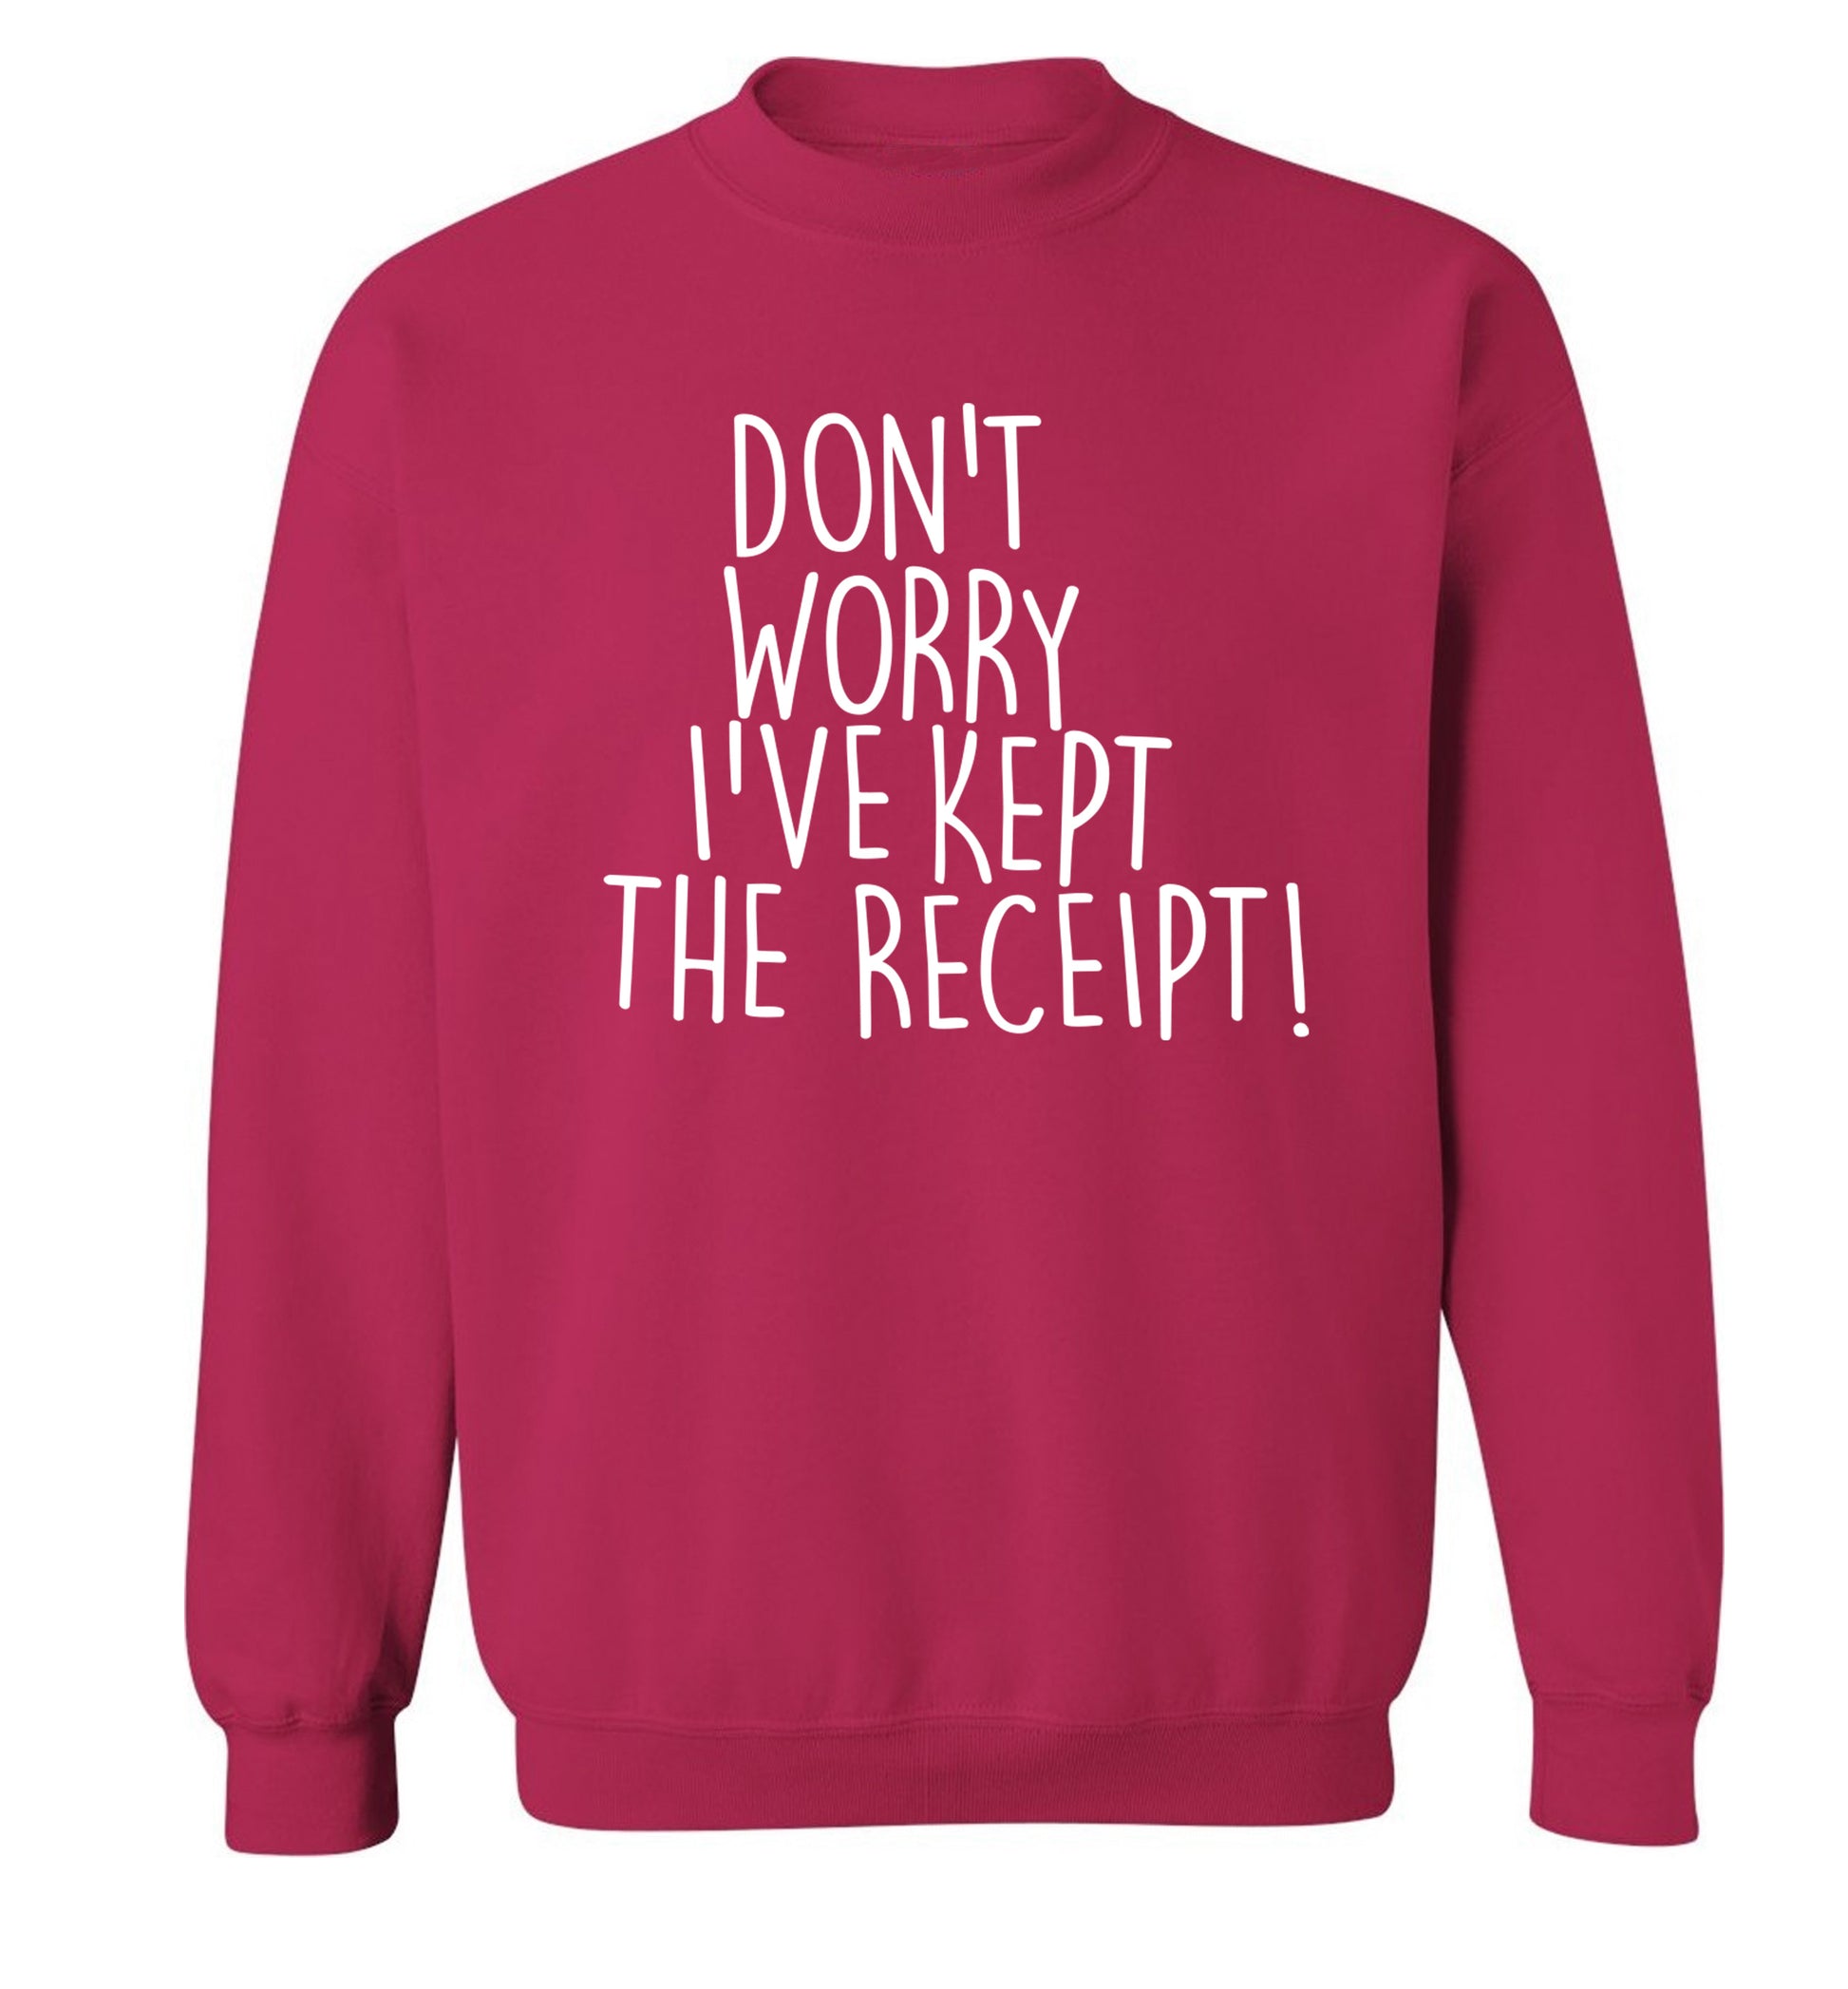 Don't Worry I've Kept the Receipt Adult's unisex pink Sweater 2XL